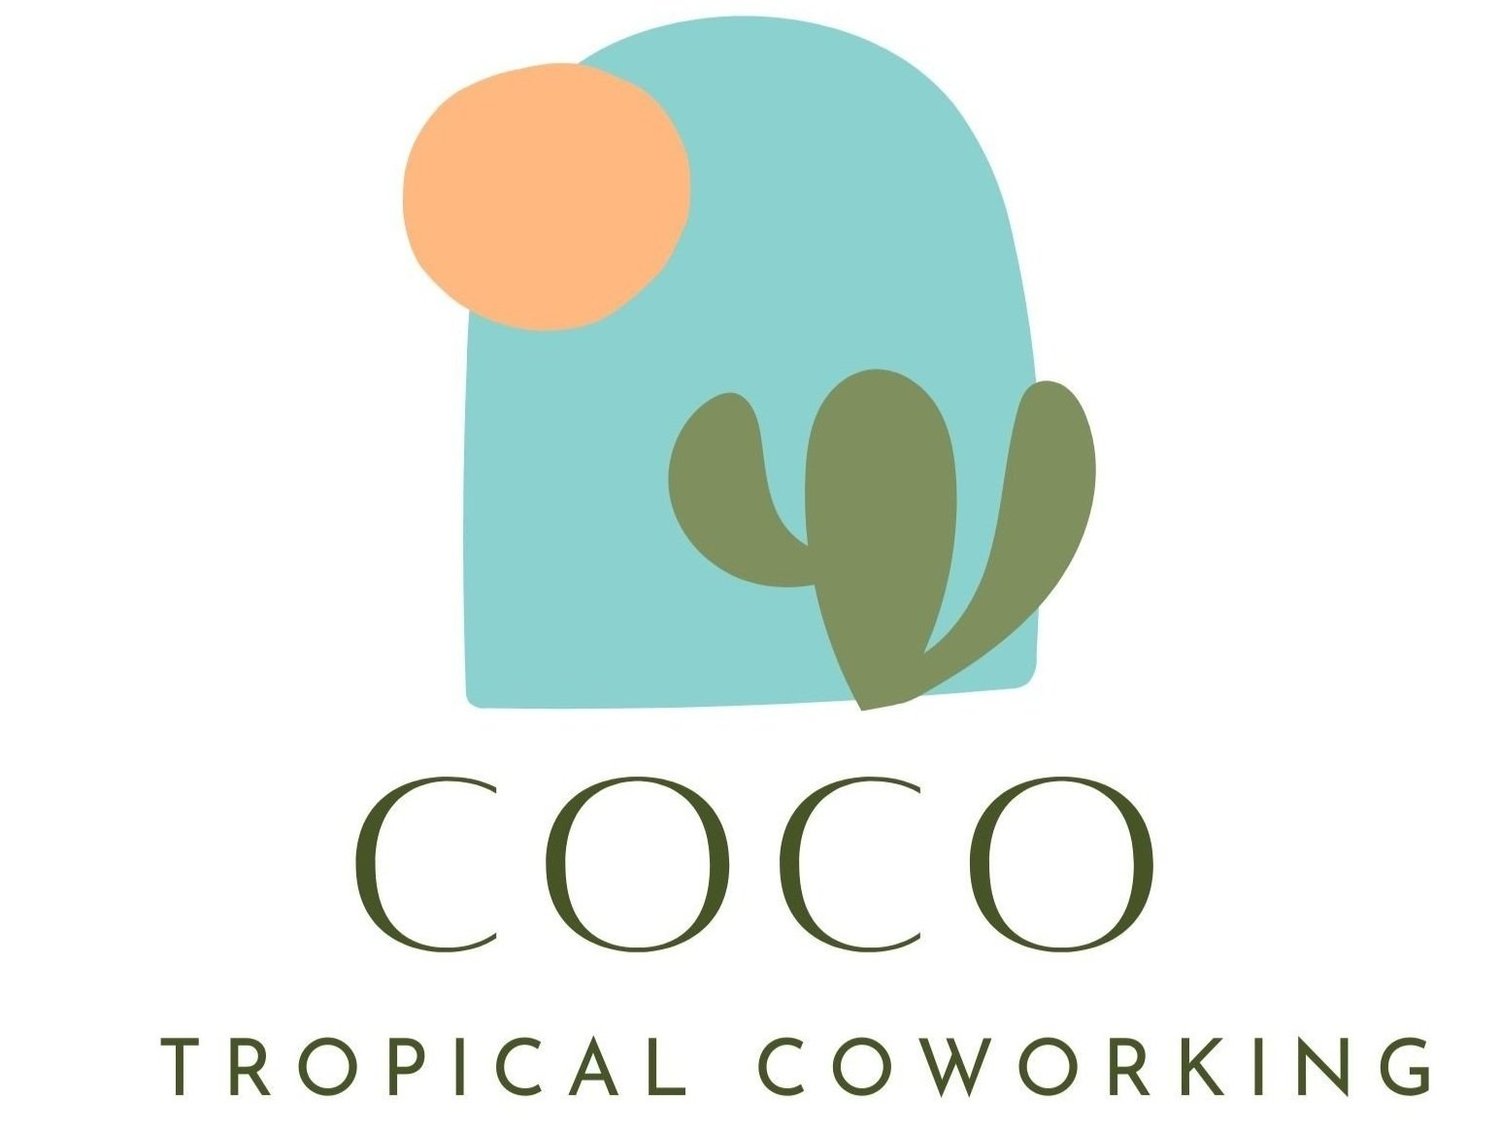 COCO TROPICAL COWORKING